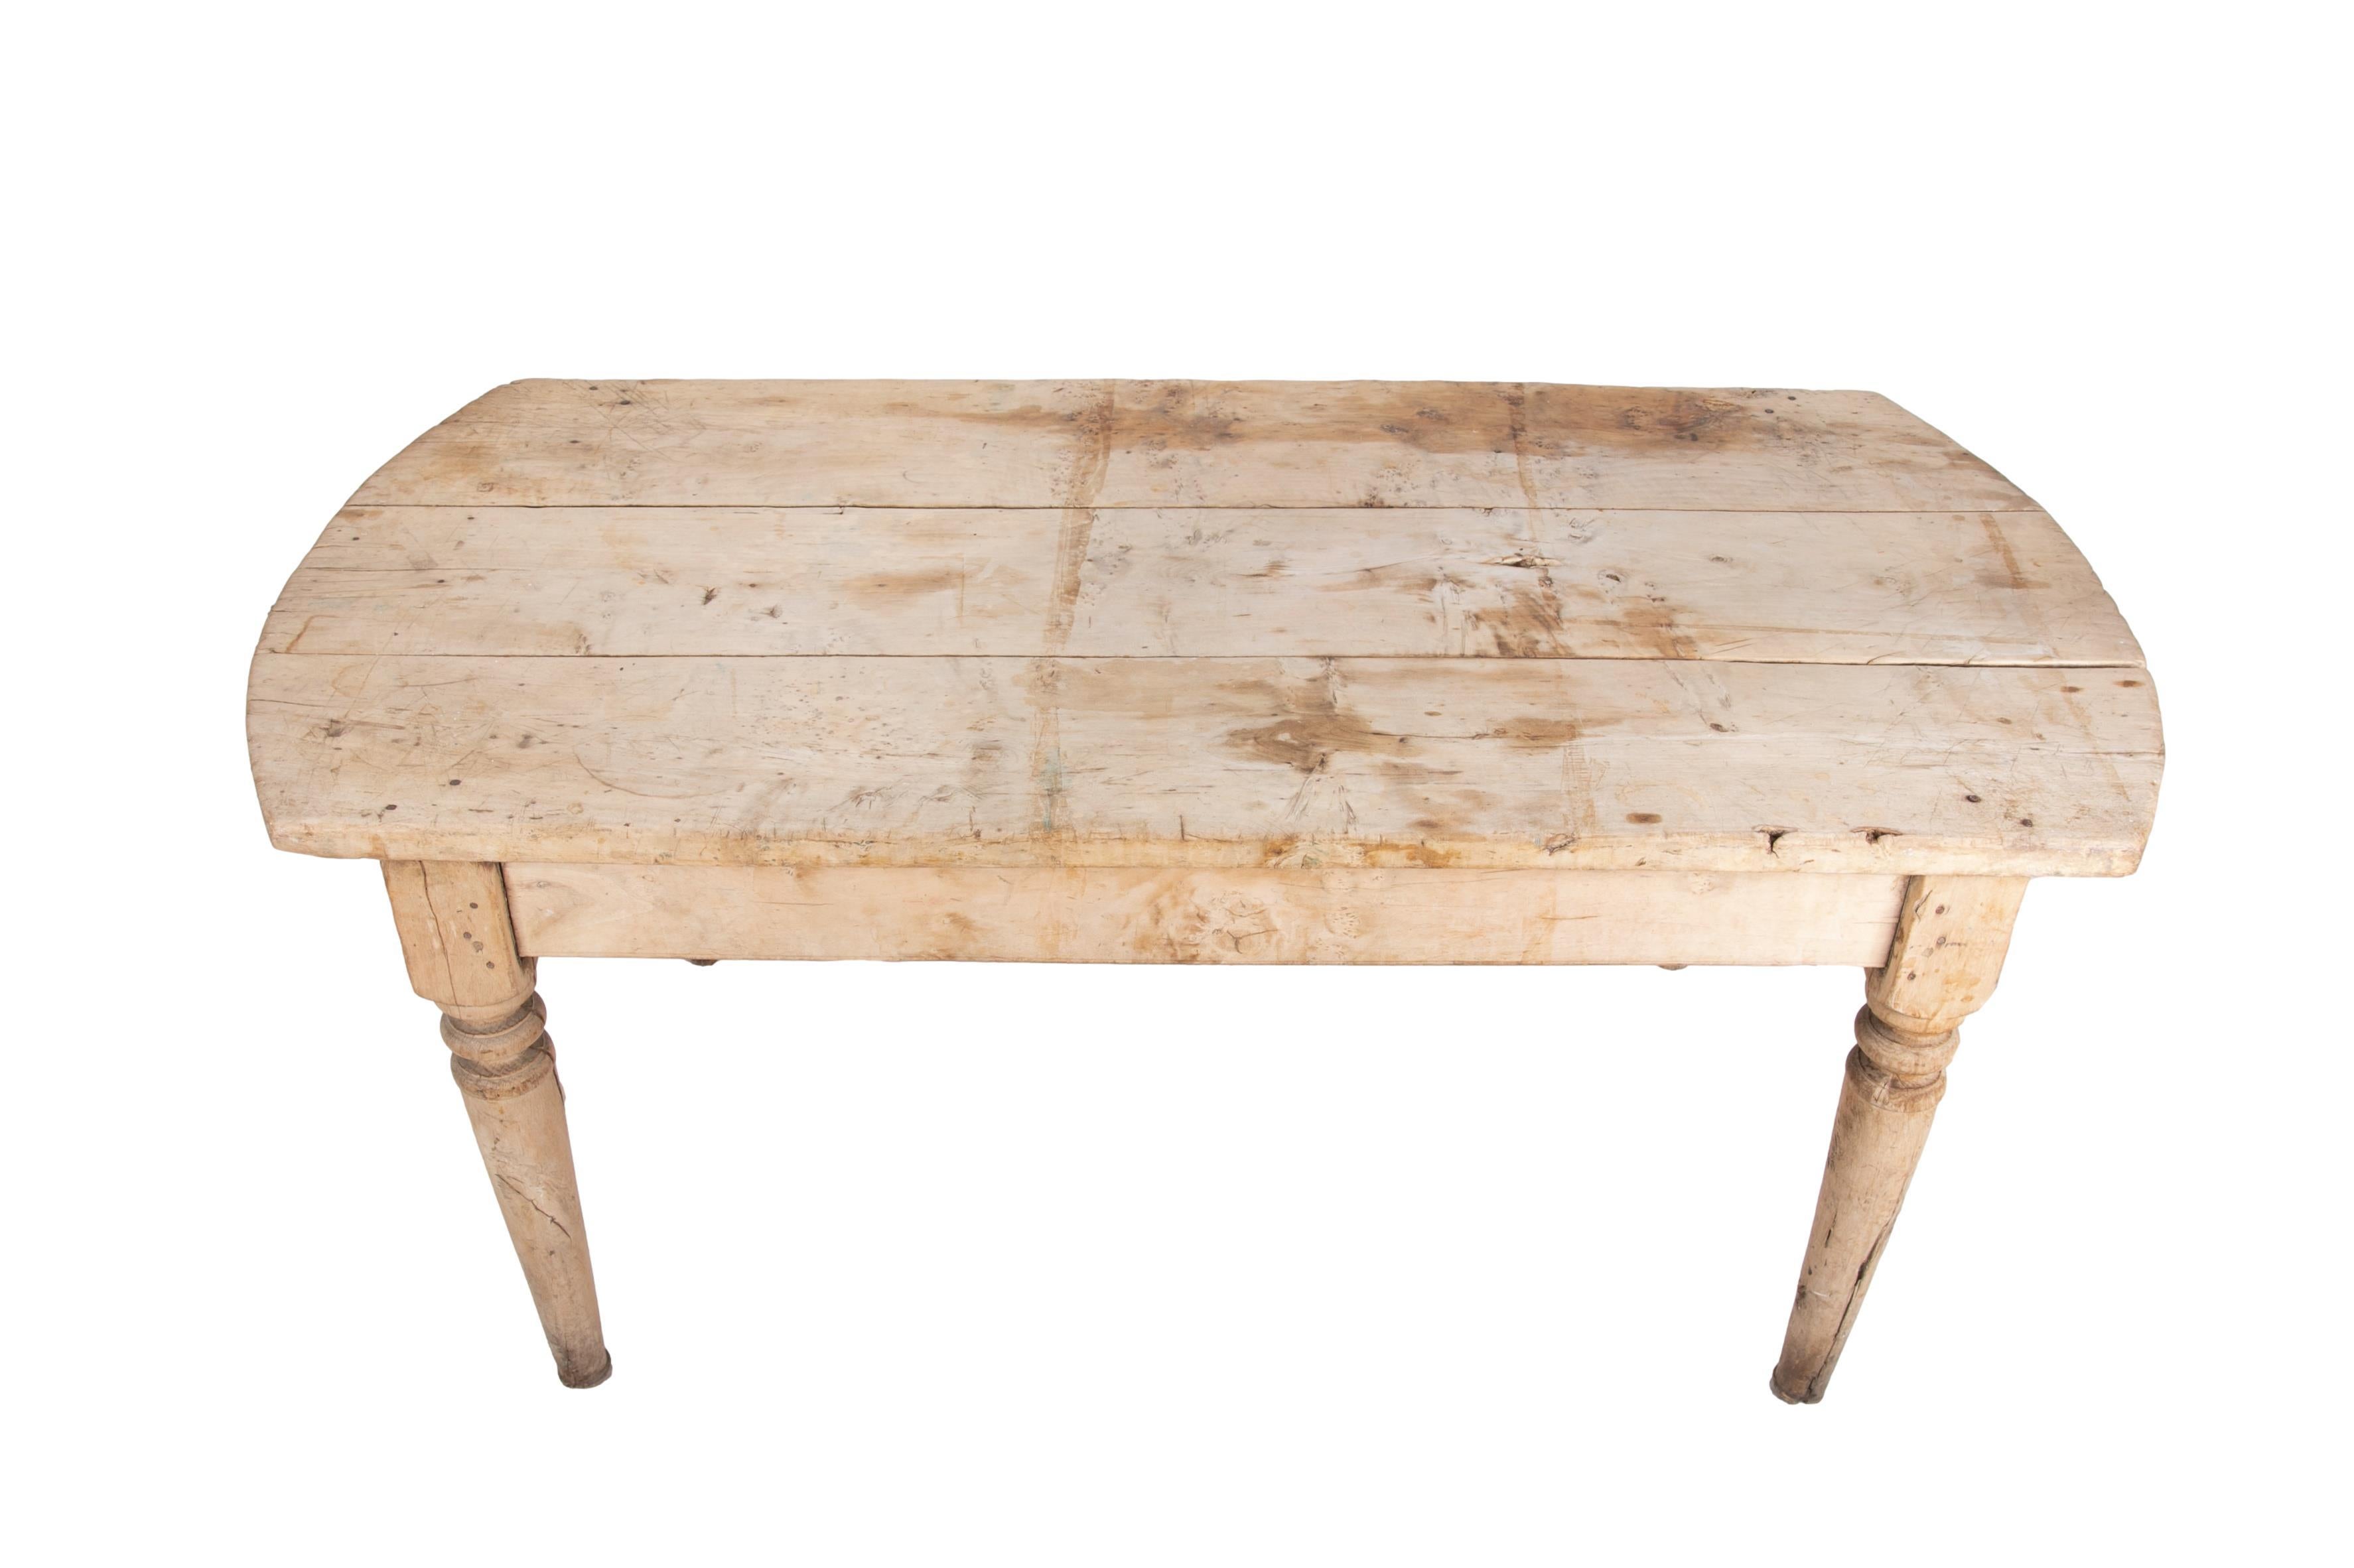 Spanish Pine Table in a Plain Natural Colour with Turned Legs For Sale